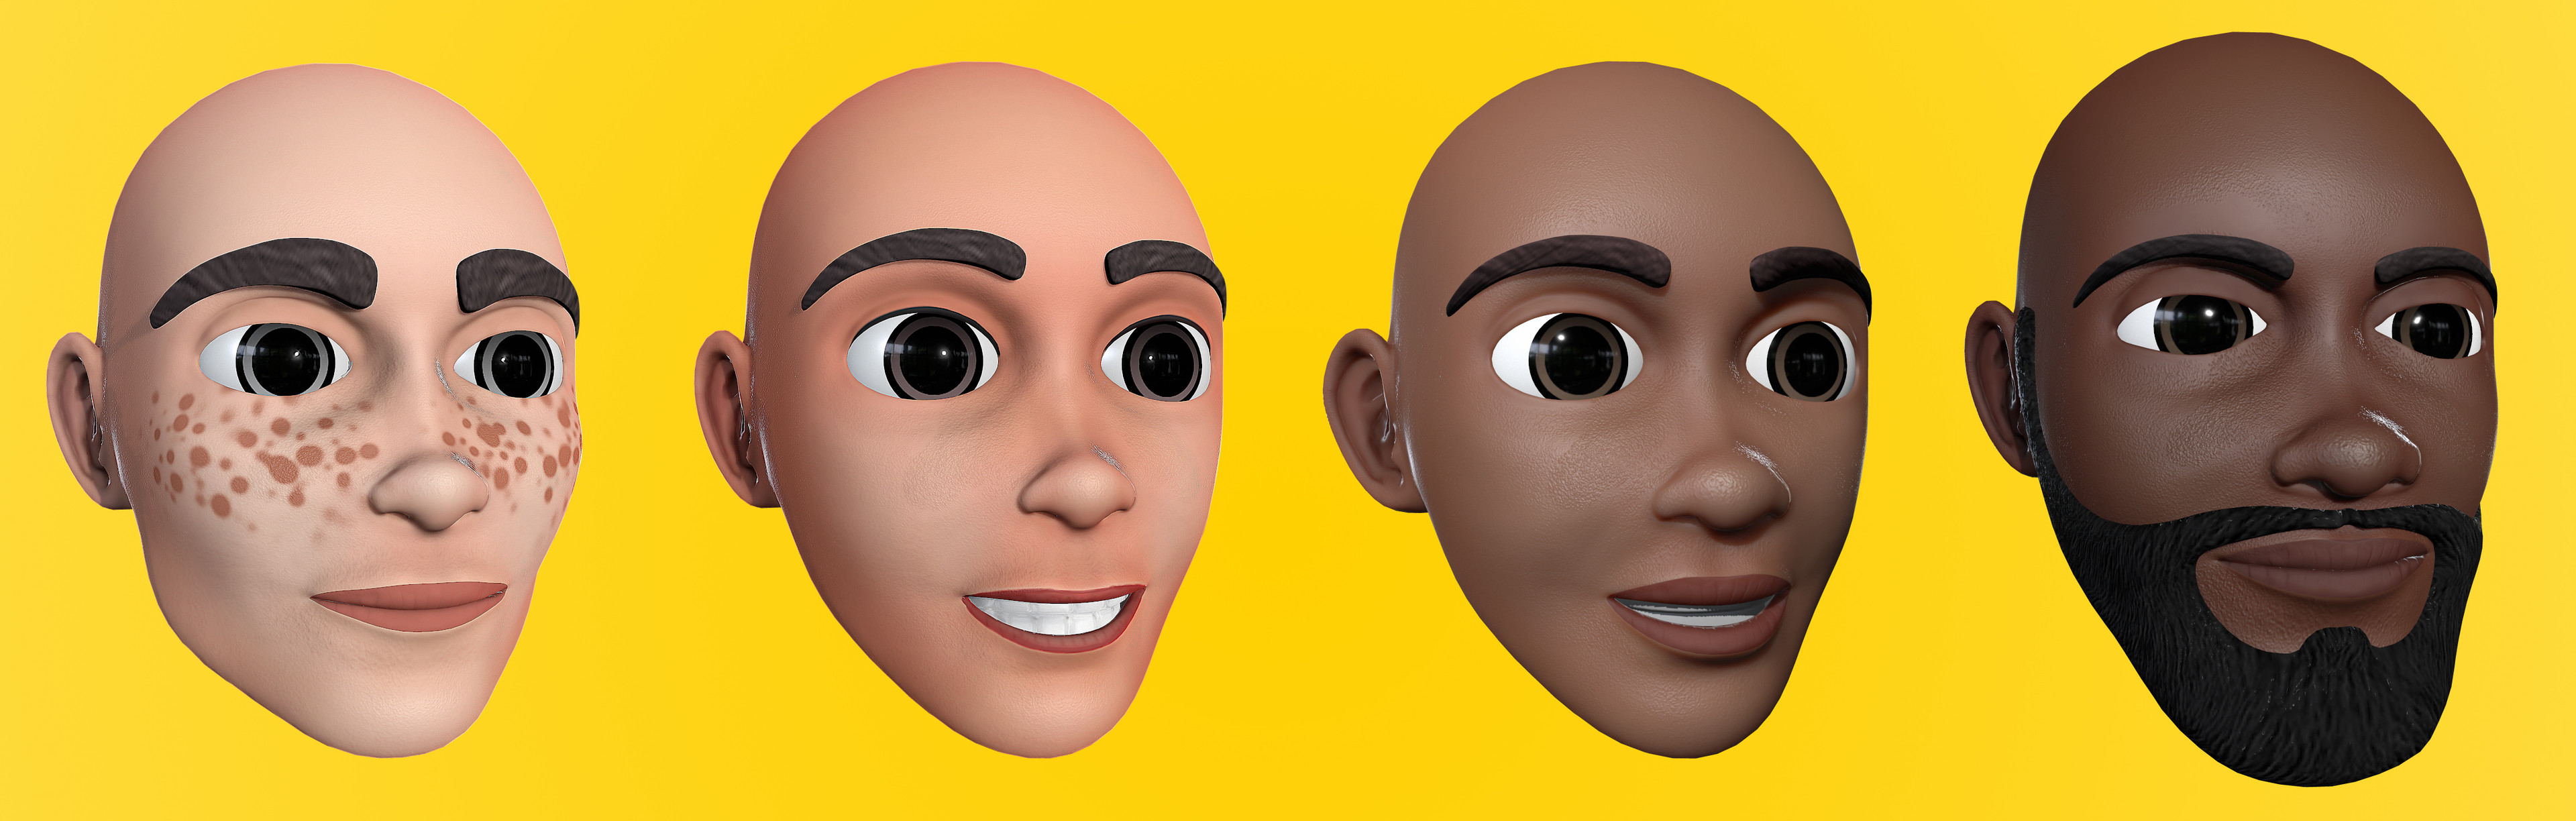 Designed customizable facial features  facial features and changes of different color values in application.